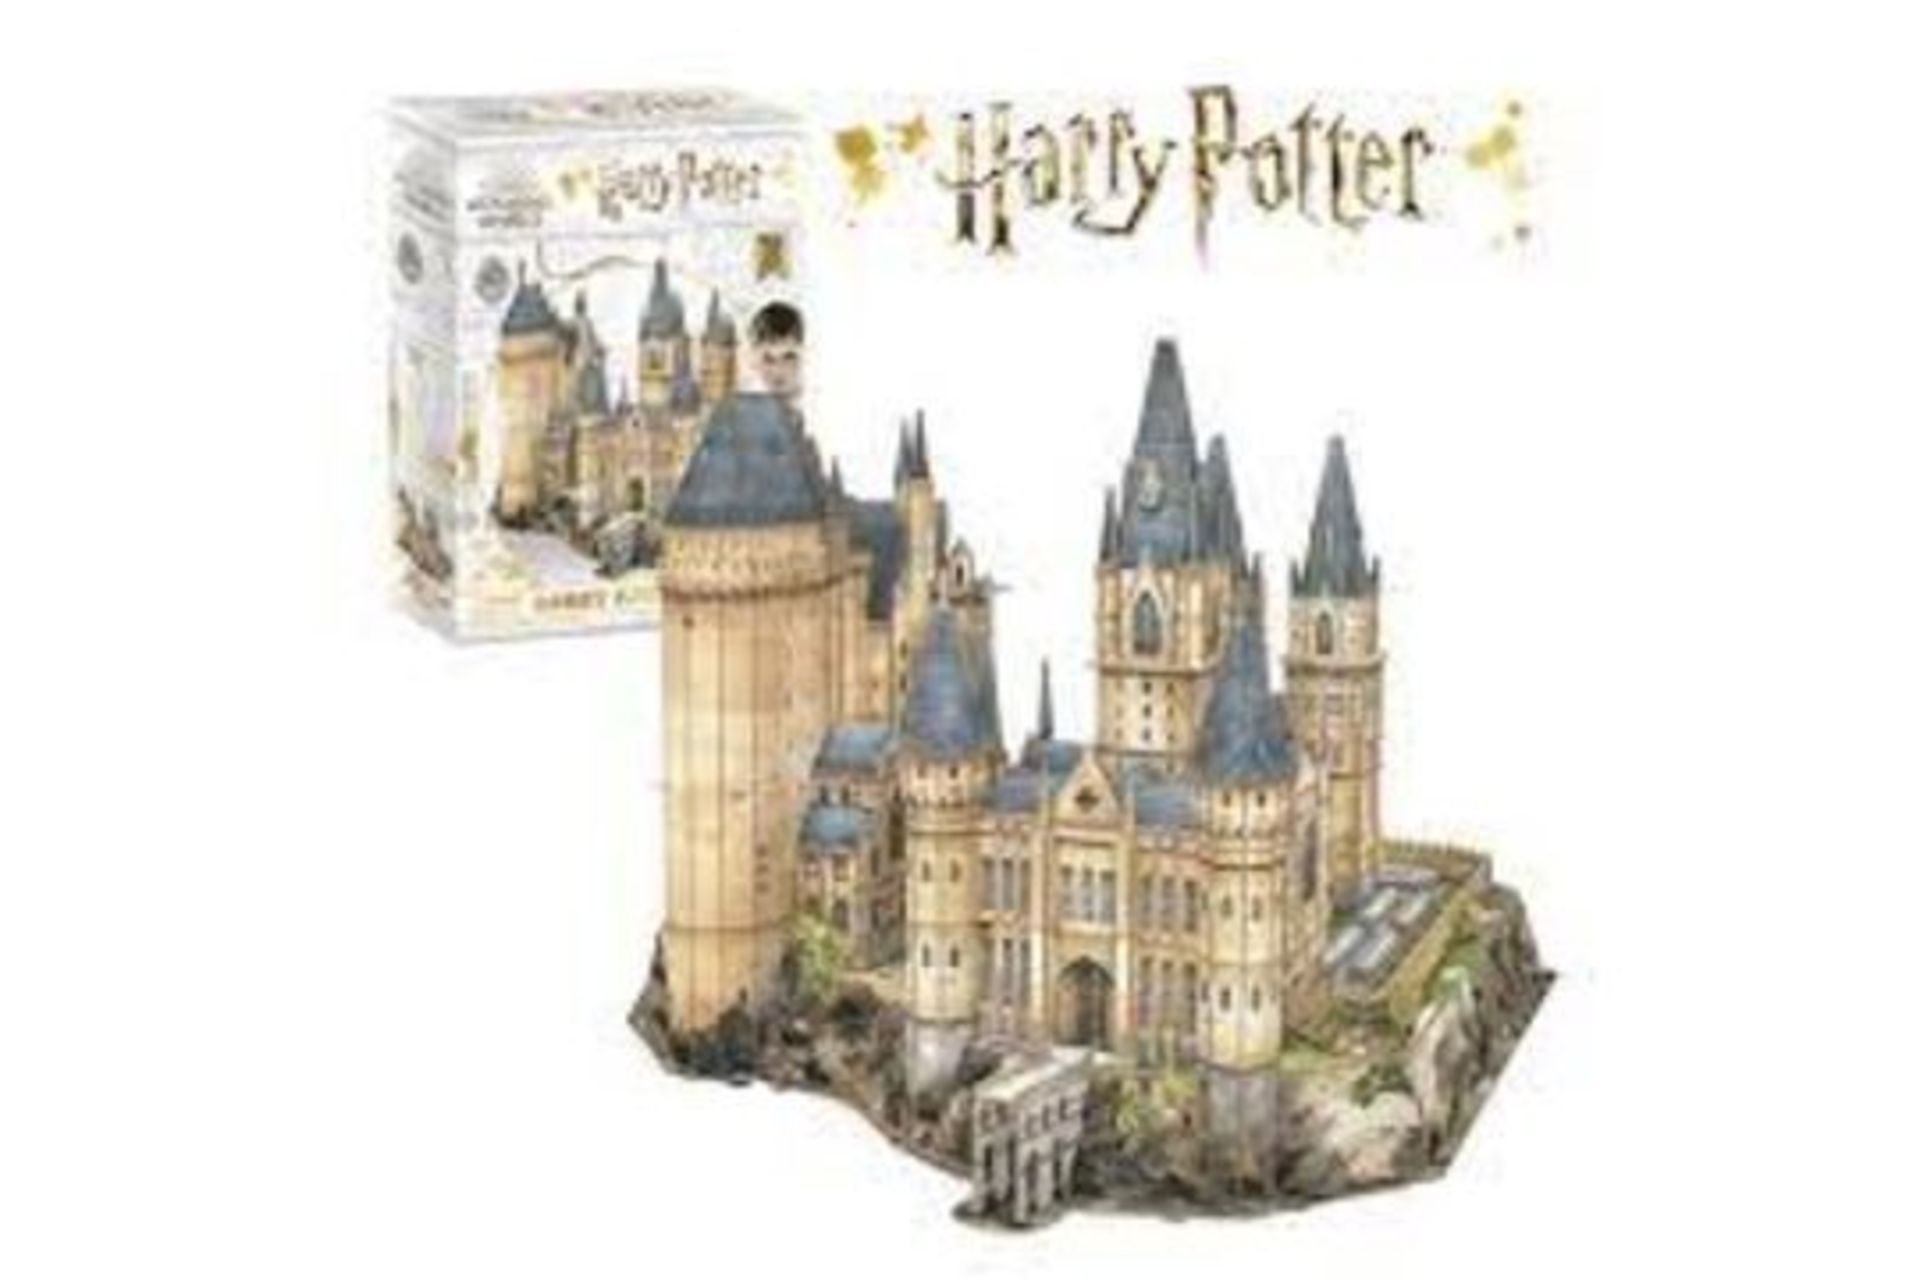 4 X BRAND NEW HARRY POTTER 3D HOGWARTS ASTRONOMY TOWERS PCK